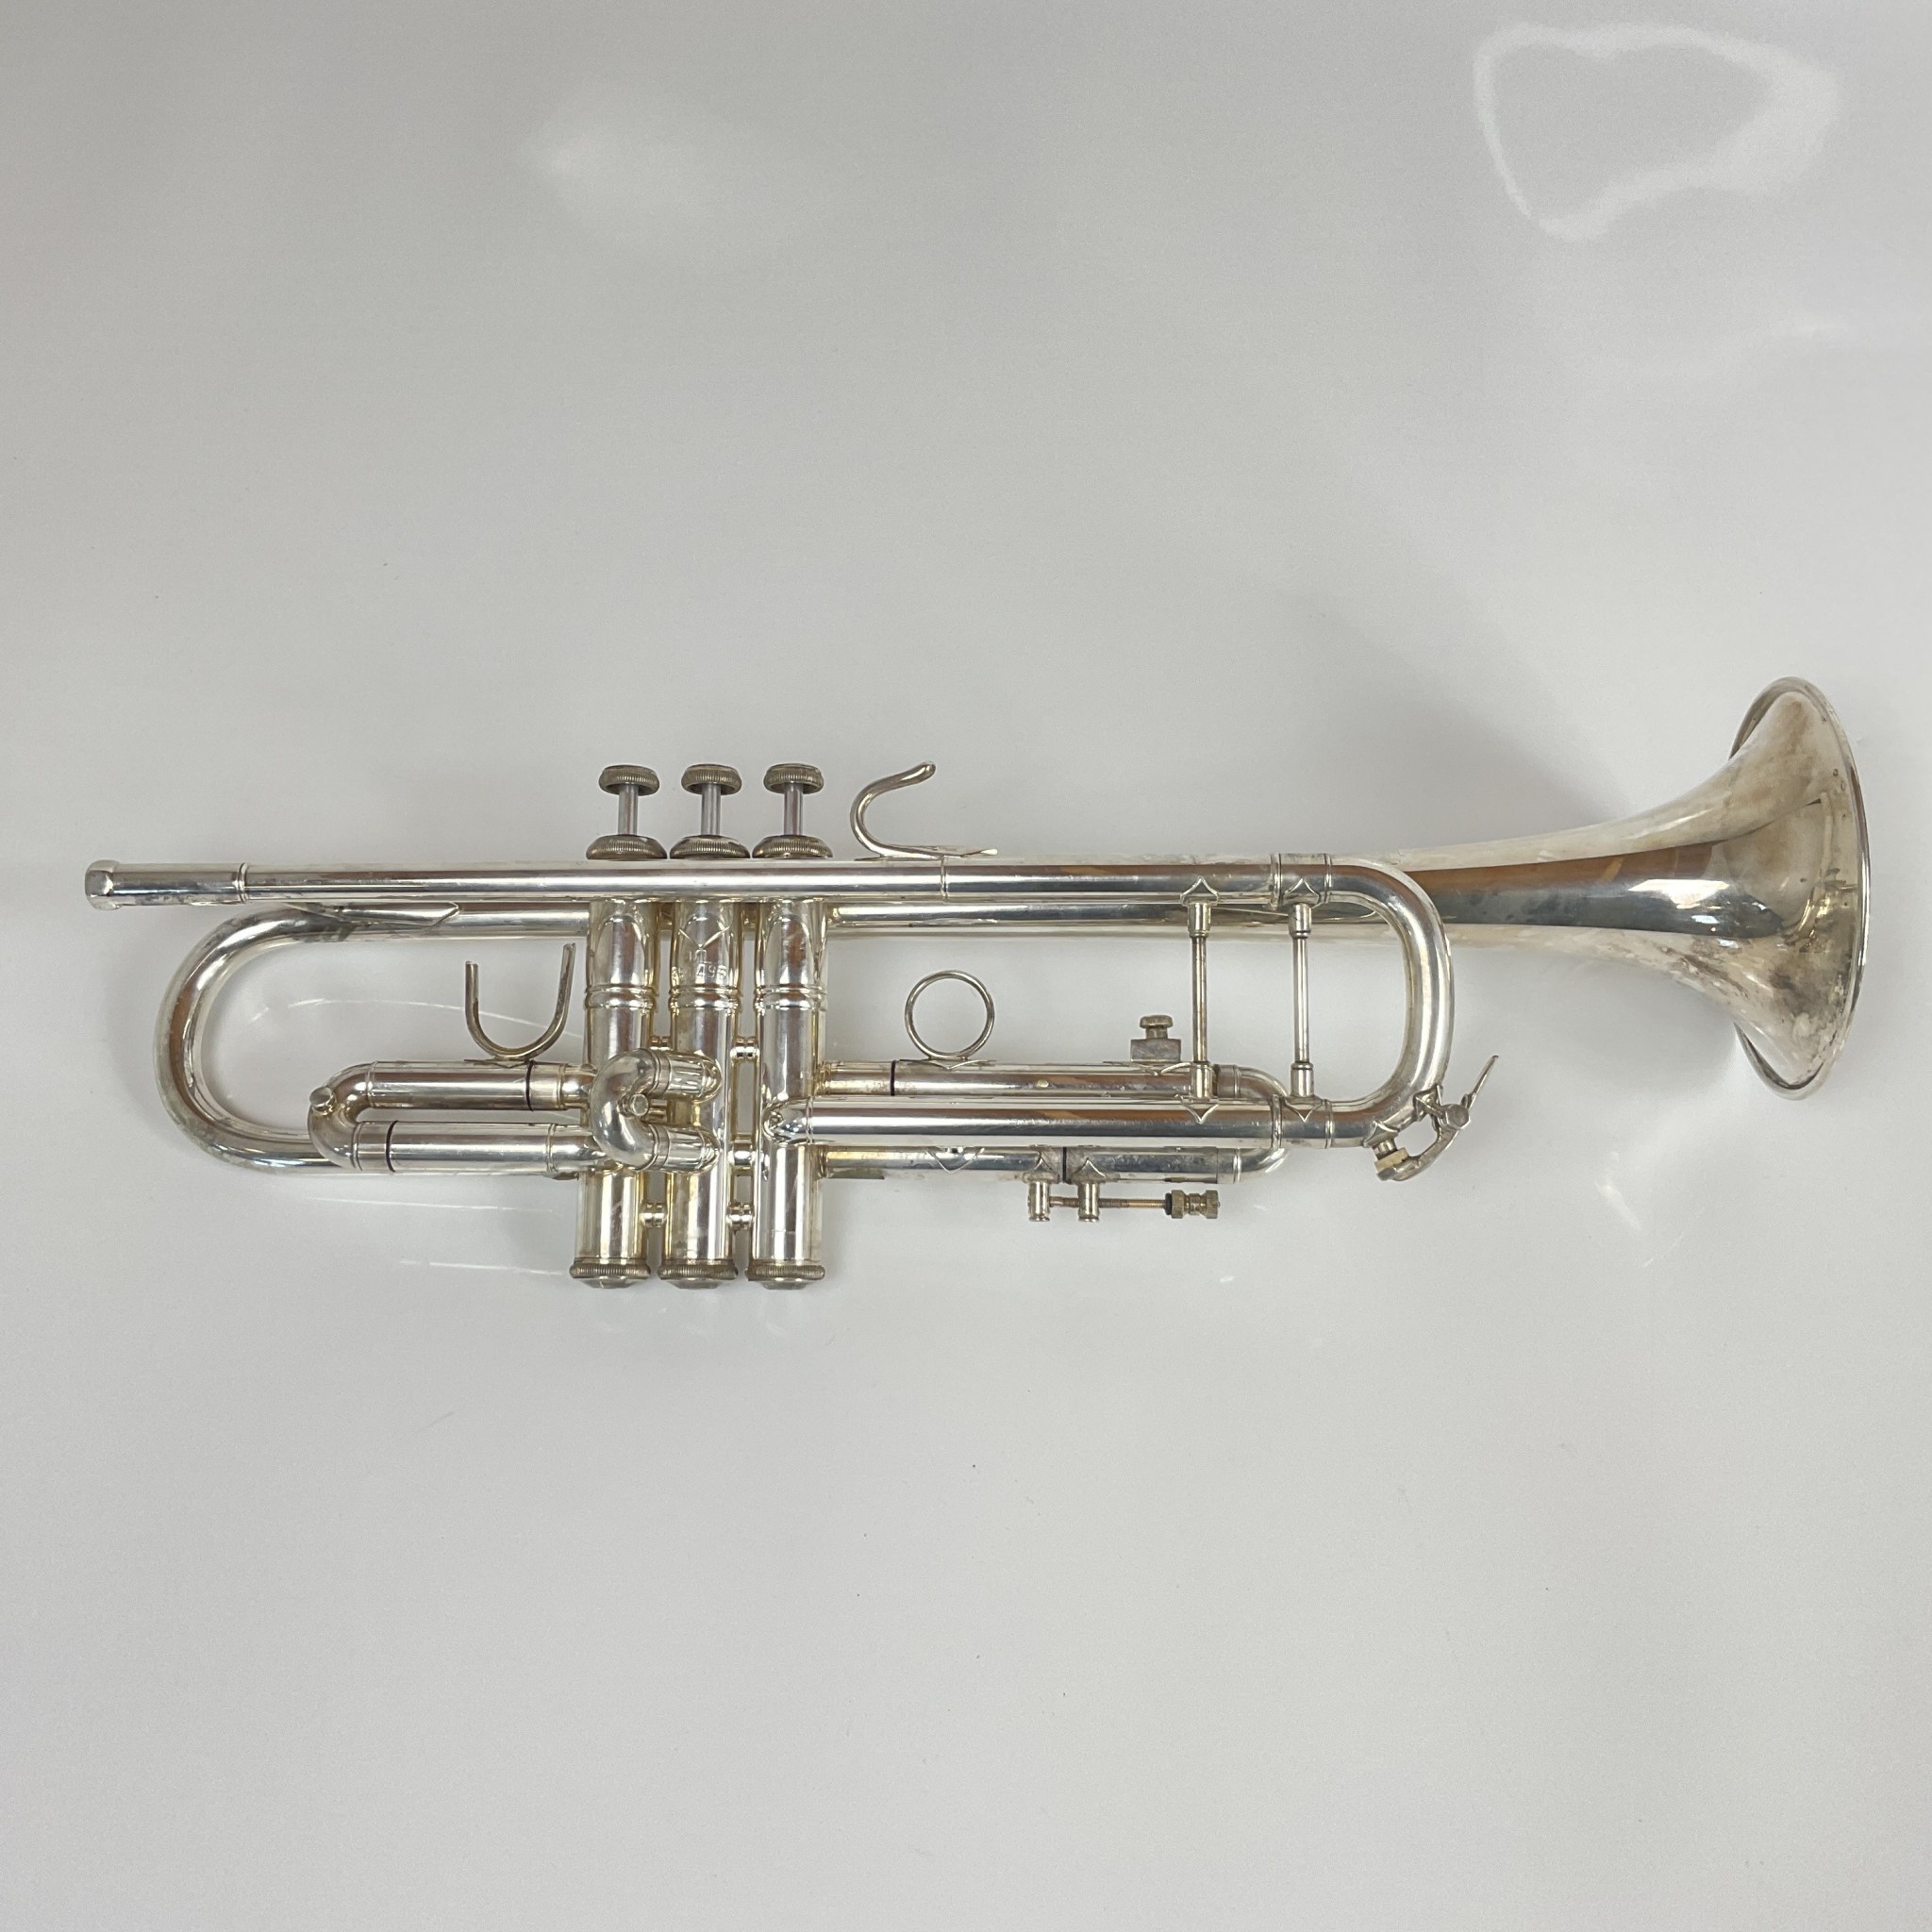 Bach Used Bach 37 Bb Trumpet (SN: 361496)